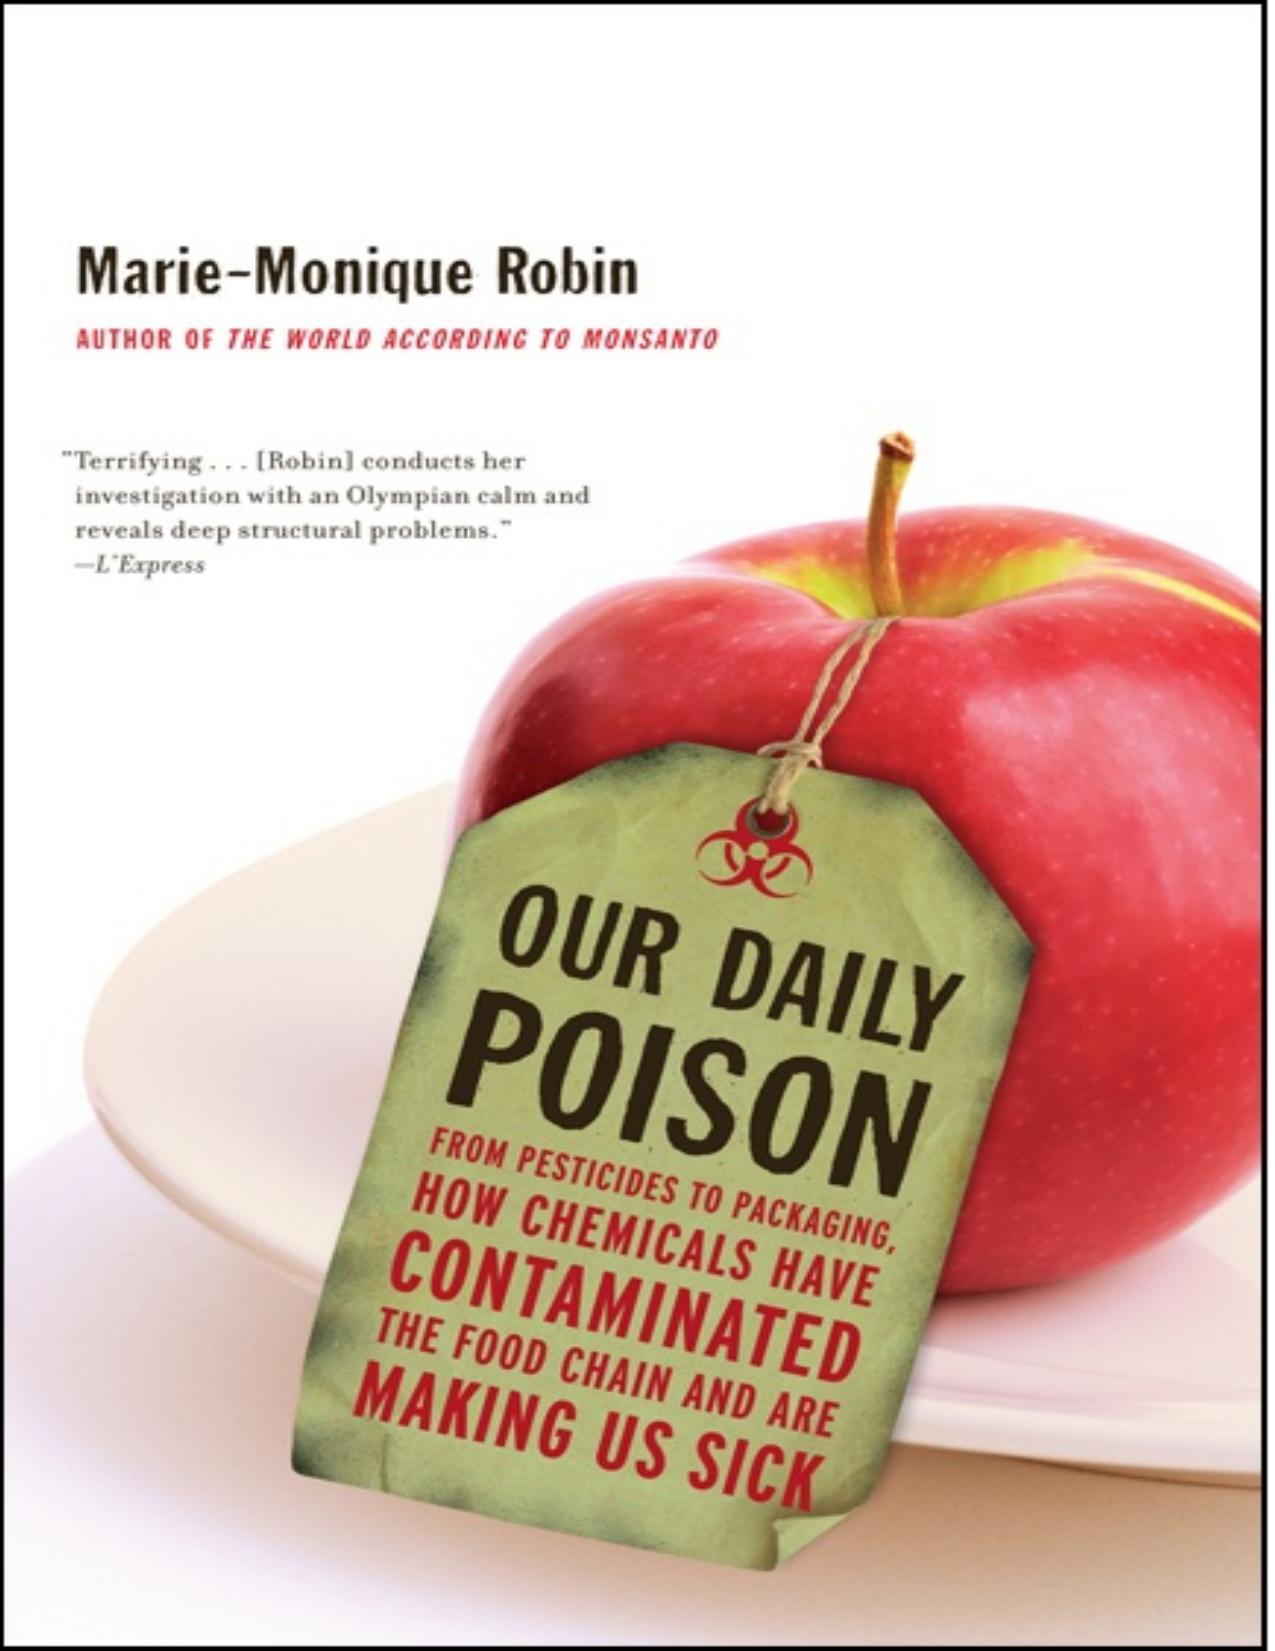 Our Daily Poison: From Pesticides to Packaging, How Chemicals Have Contaminated the Food Chain and Are Making Us Sick - PDFDrive.com